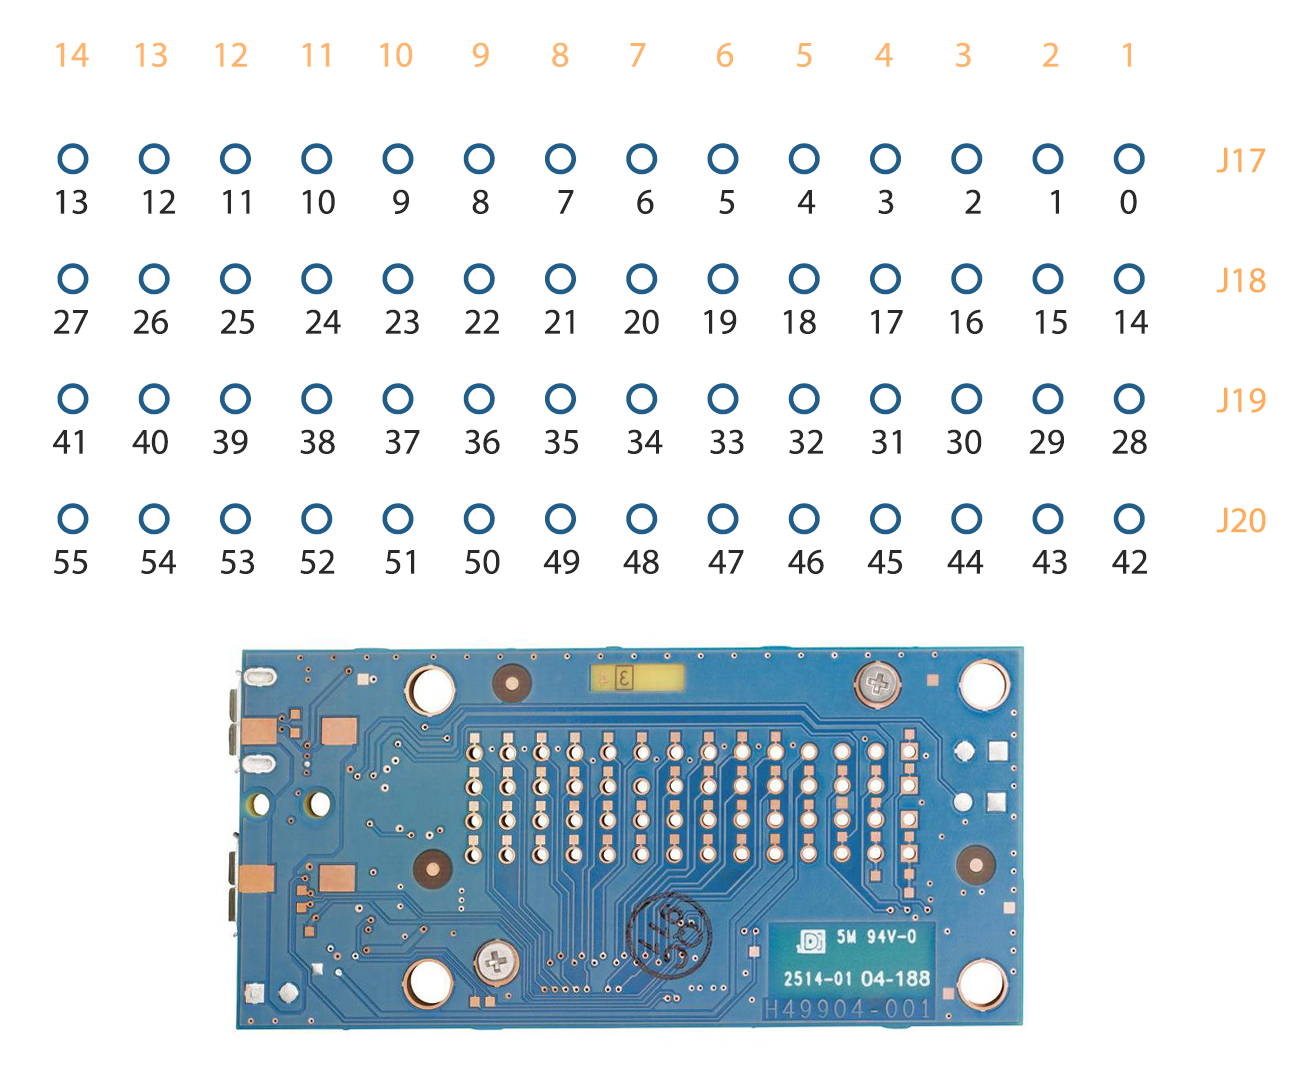 {{:iot2015:labs:edison_pins.png?300|